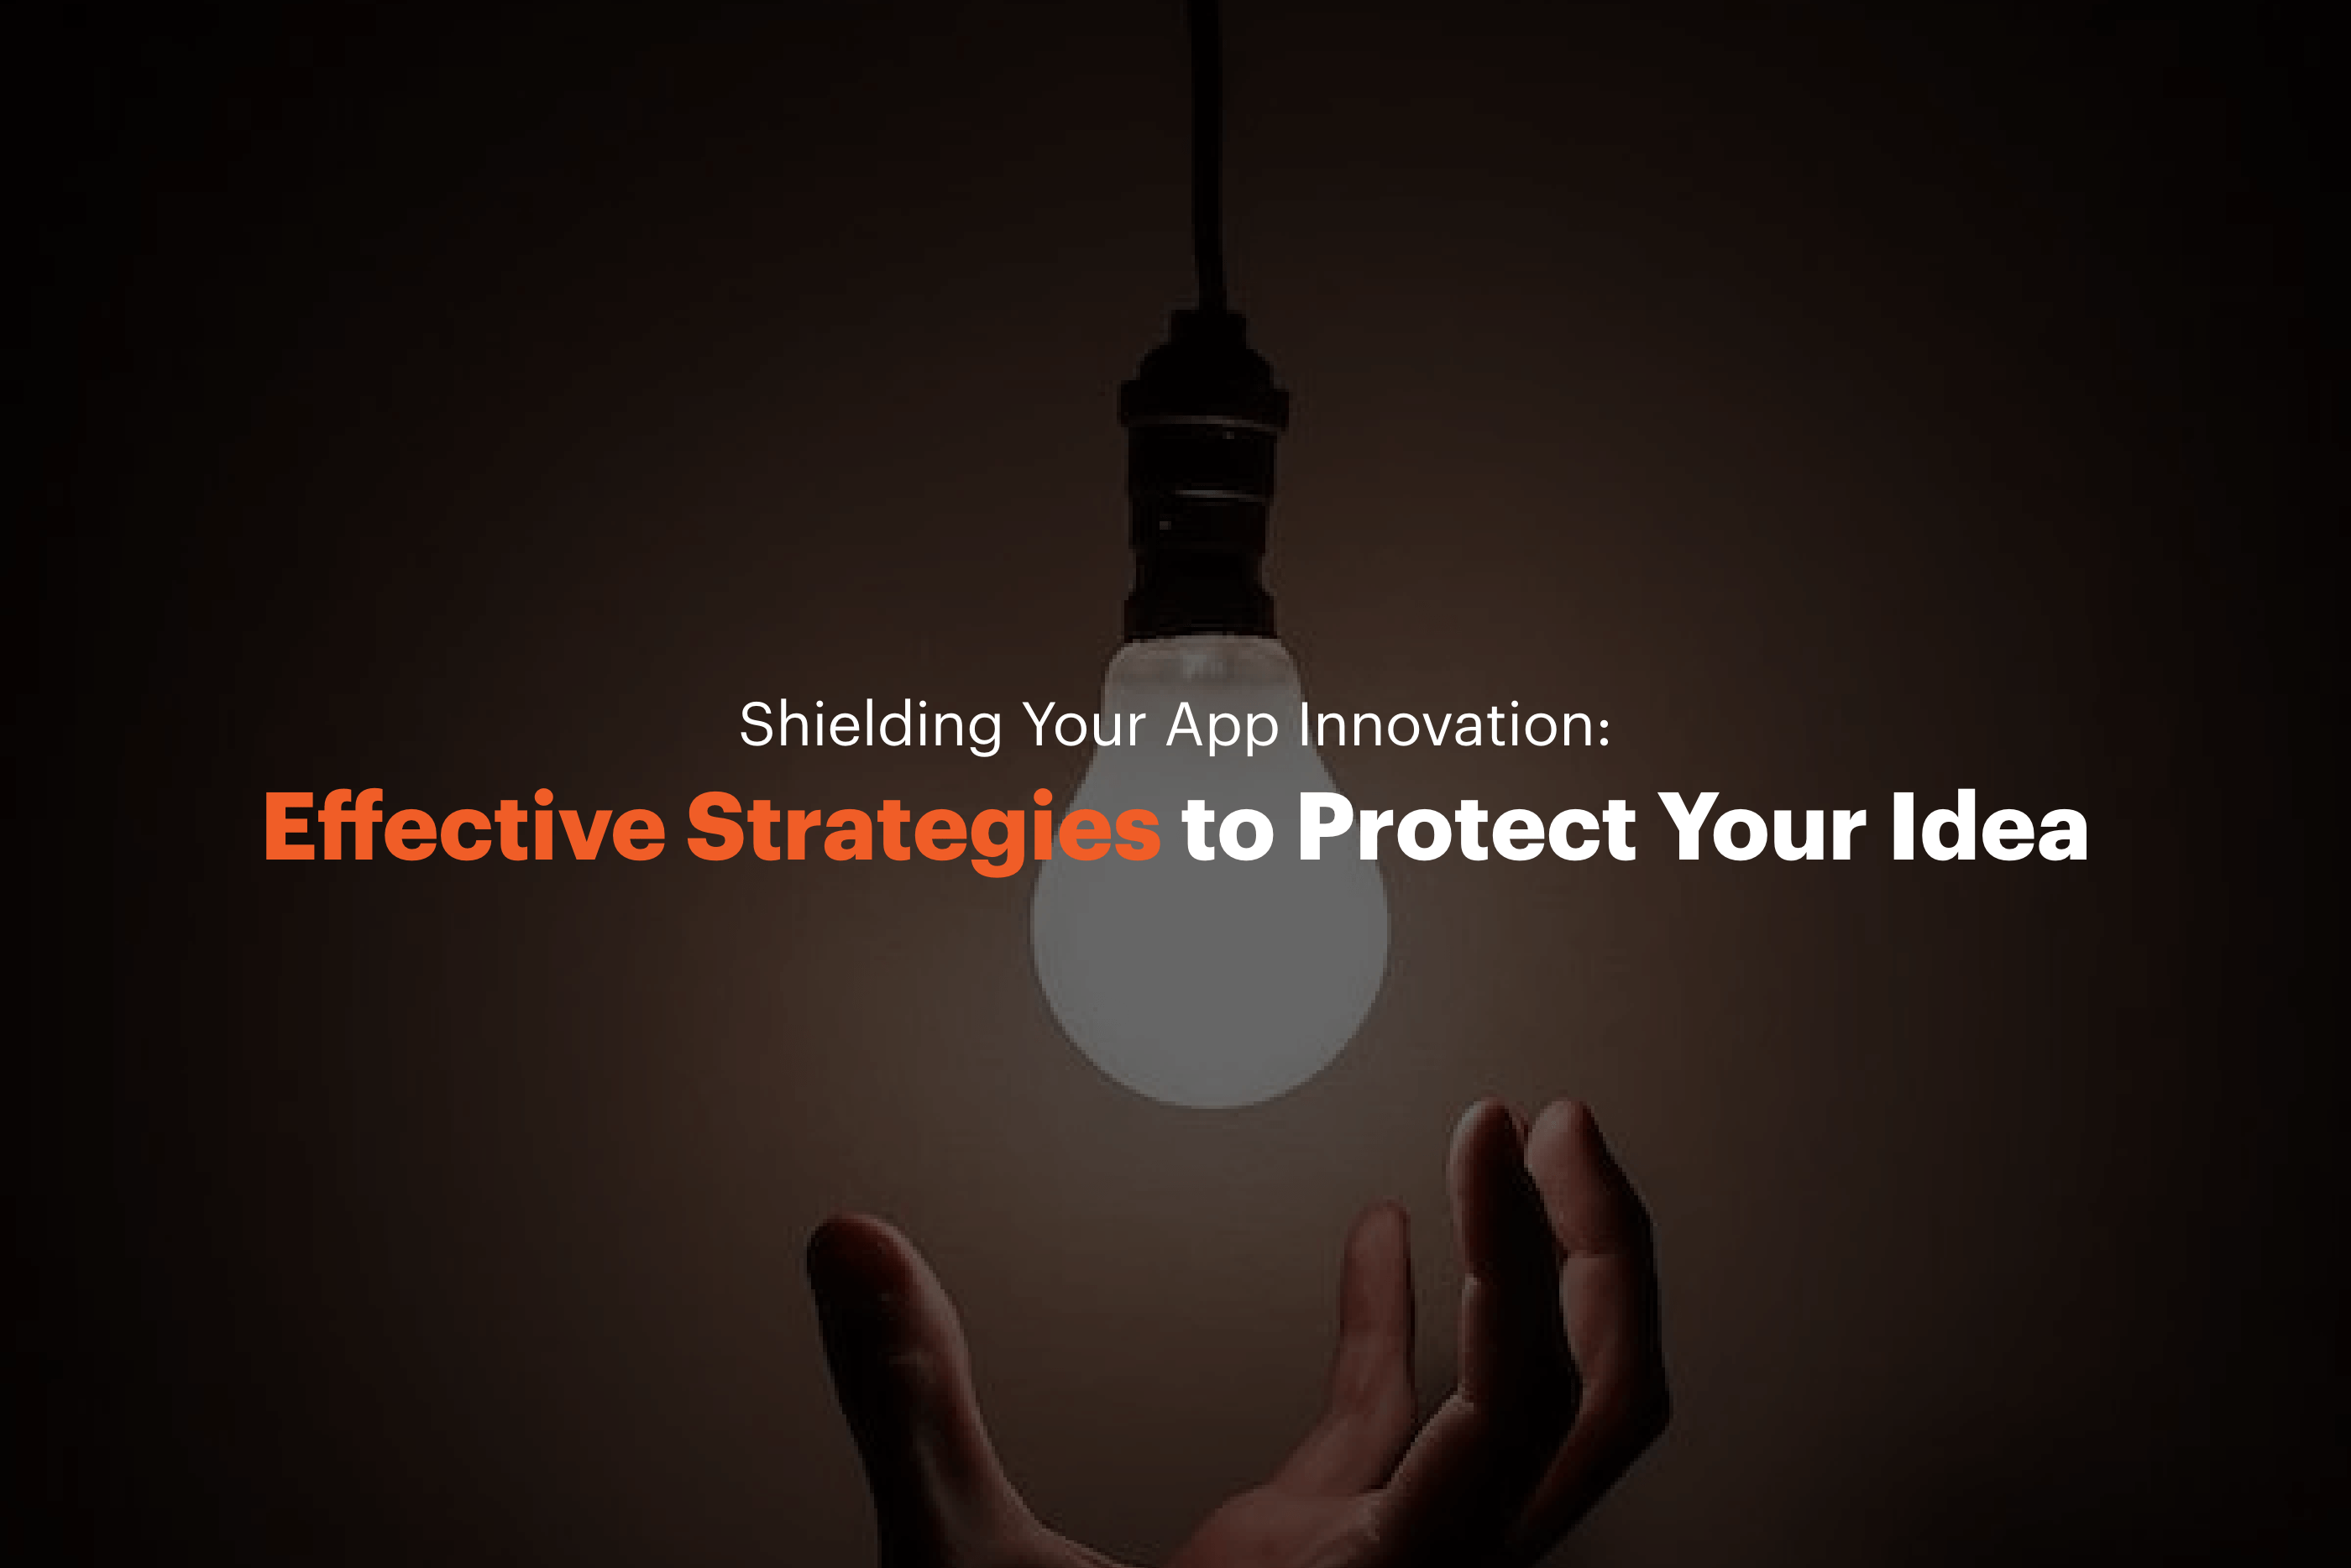 Shielding Your App Innovation: Effective Strategies to Protect Your App Idea